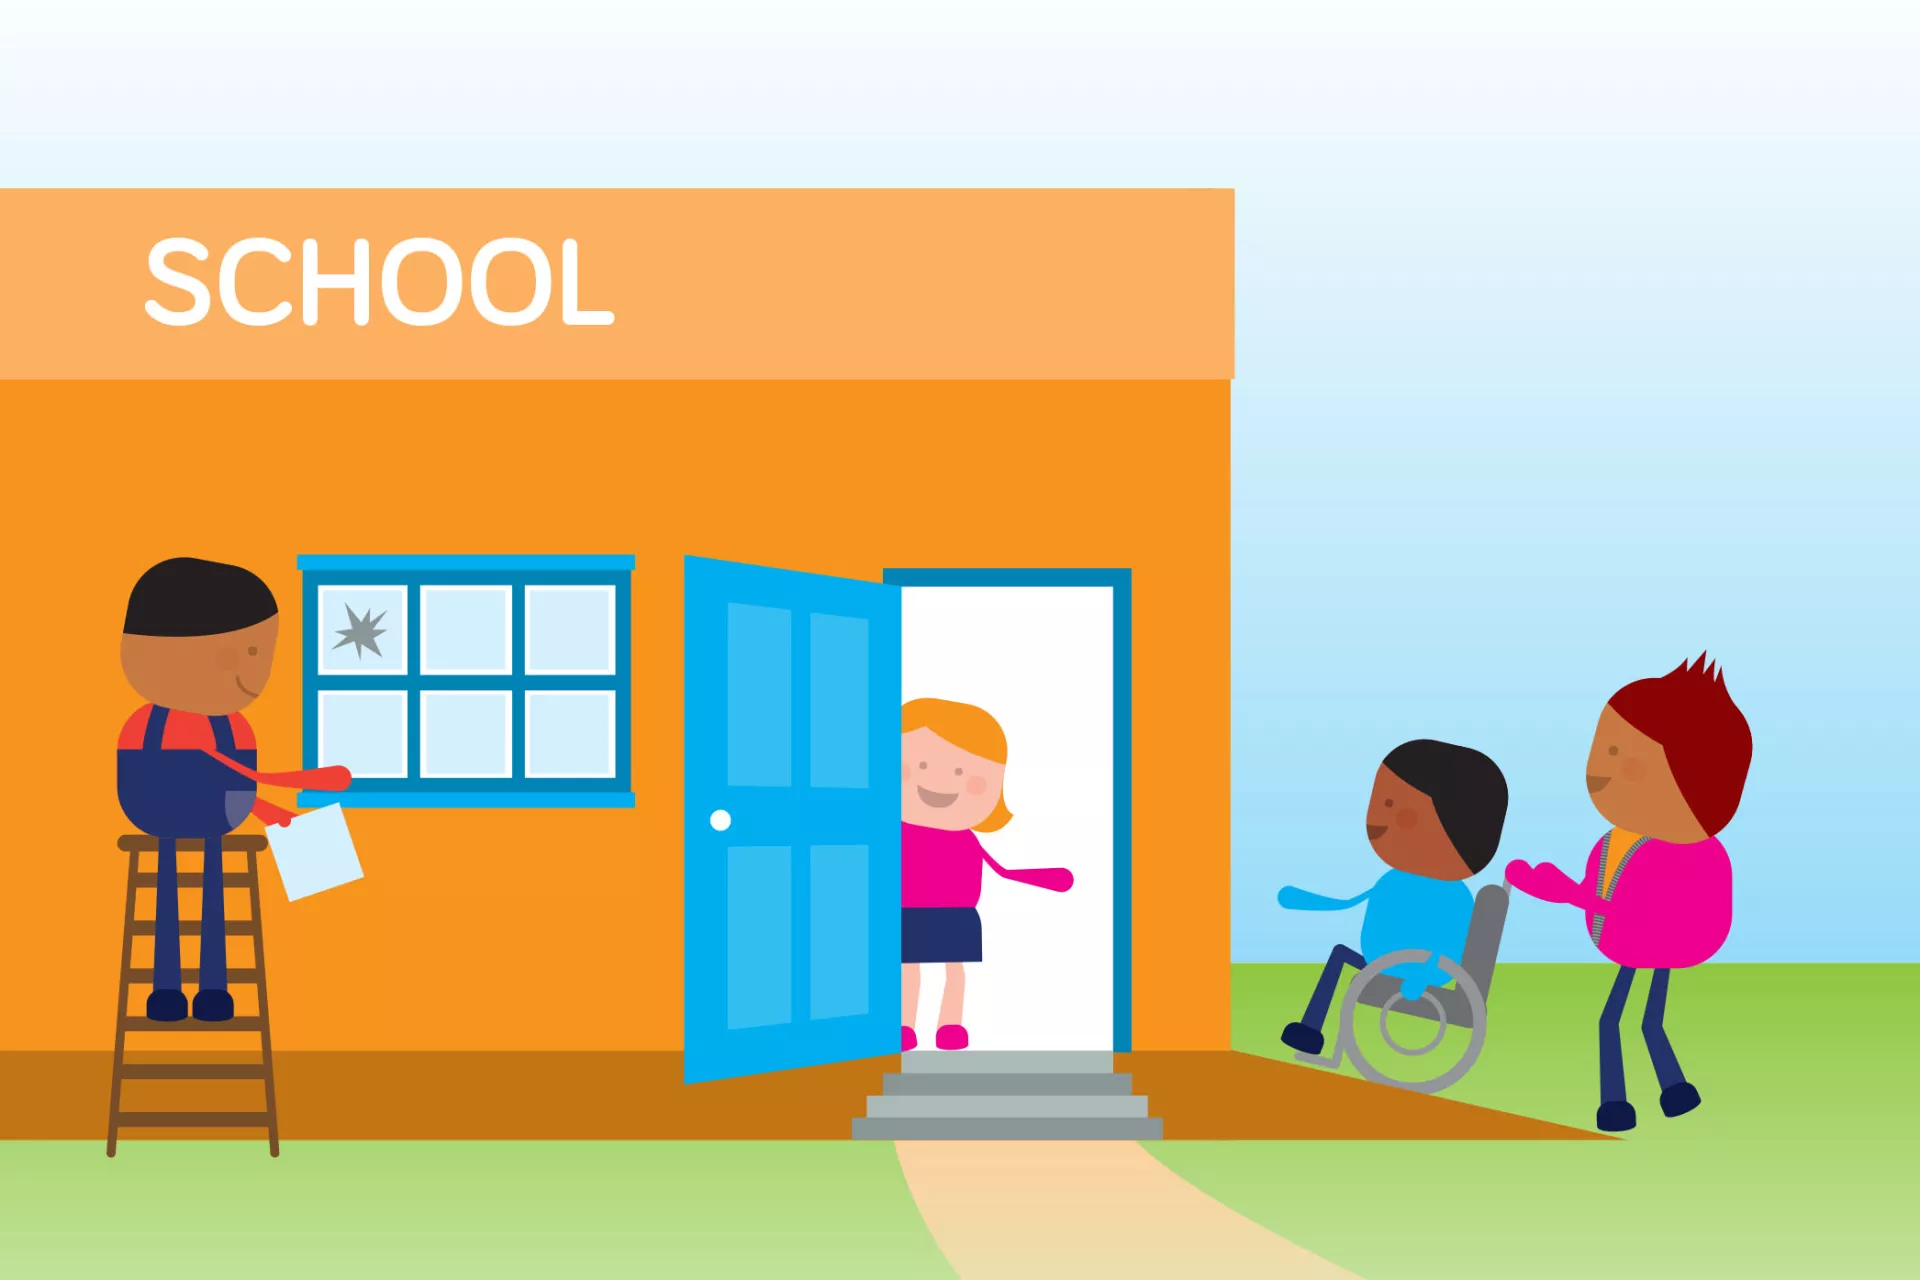 An illustration containing a school building in which a child with disability is entering 